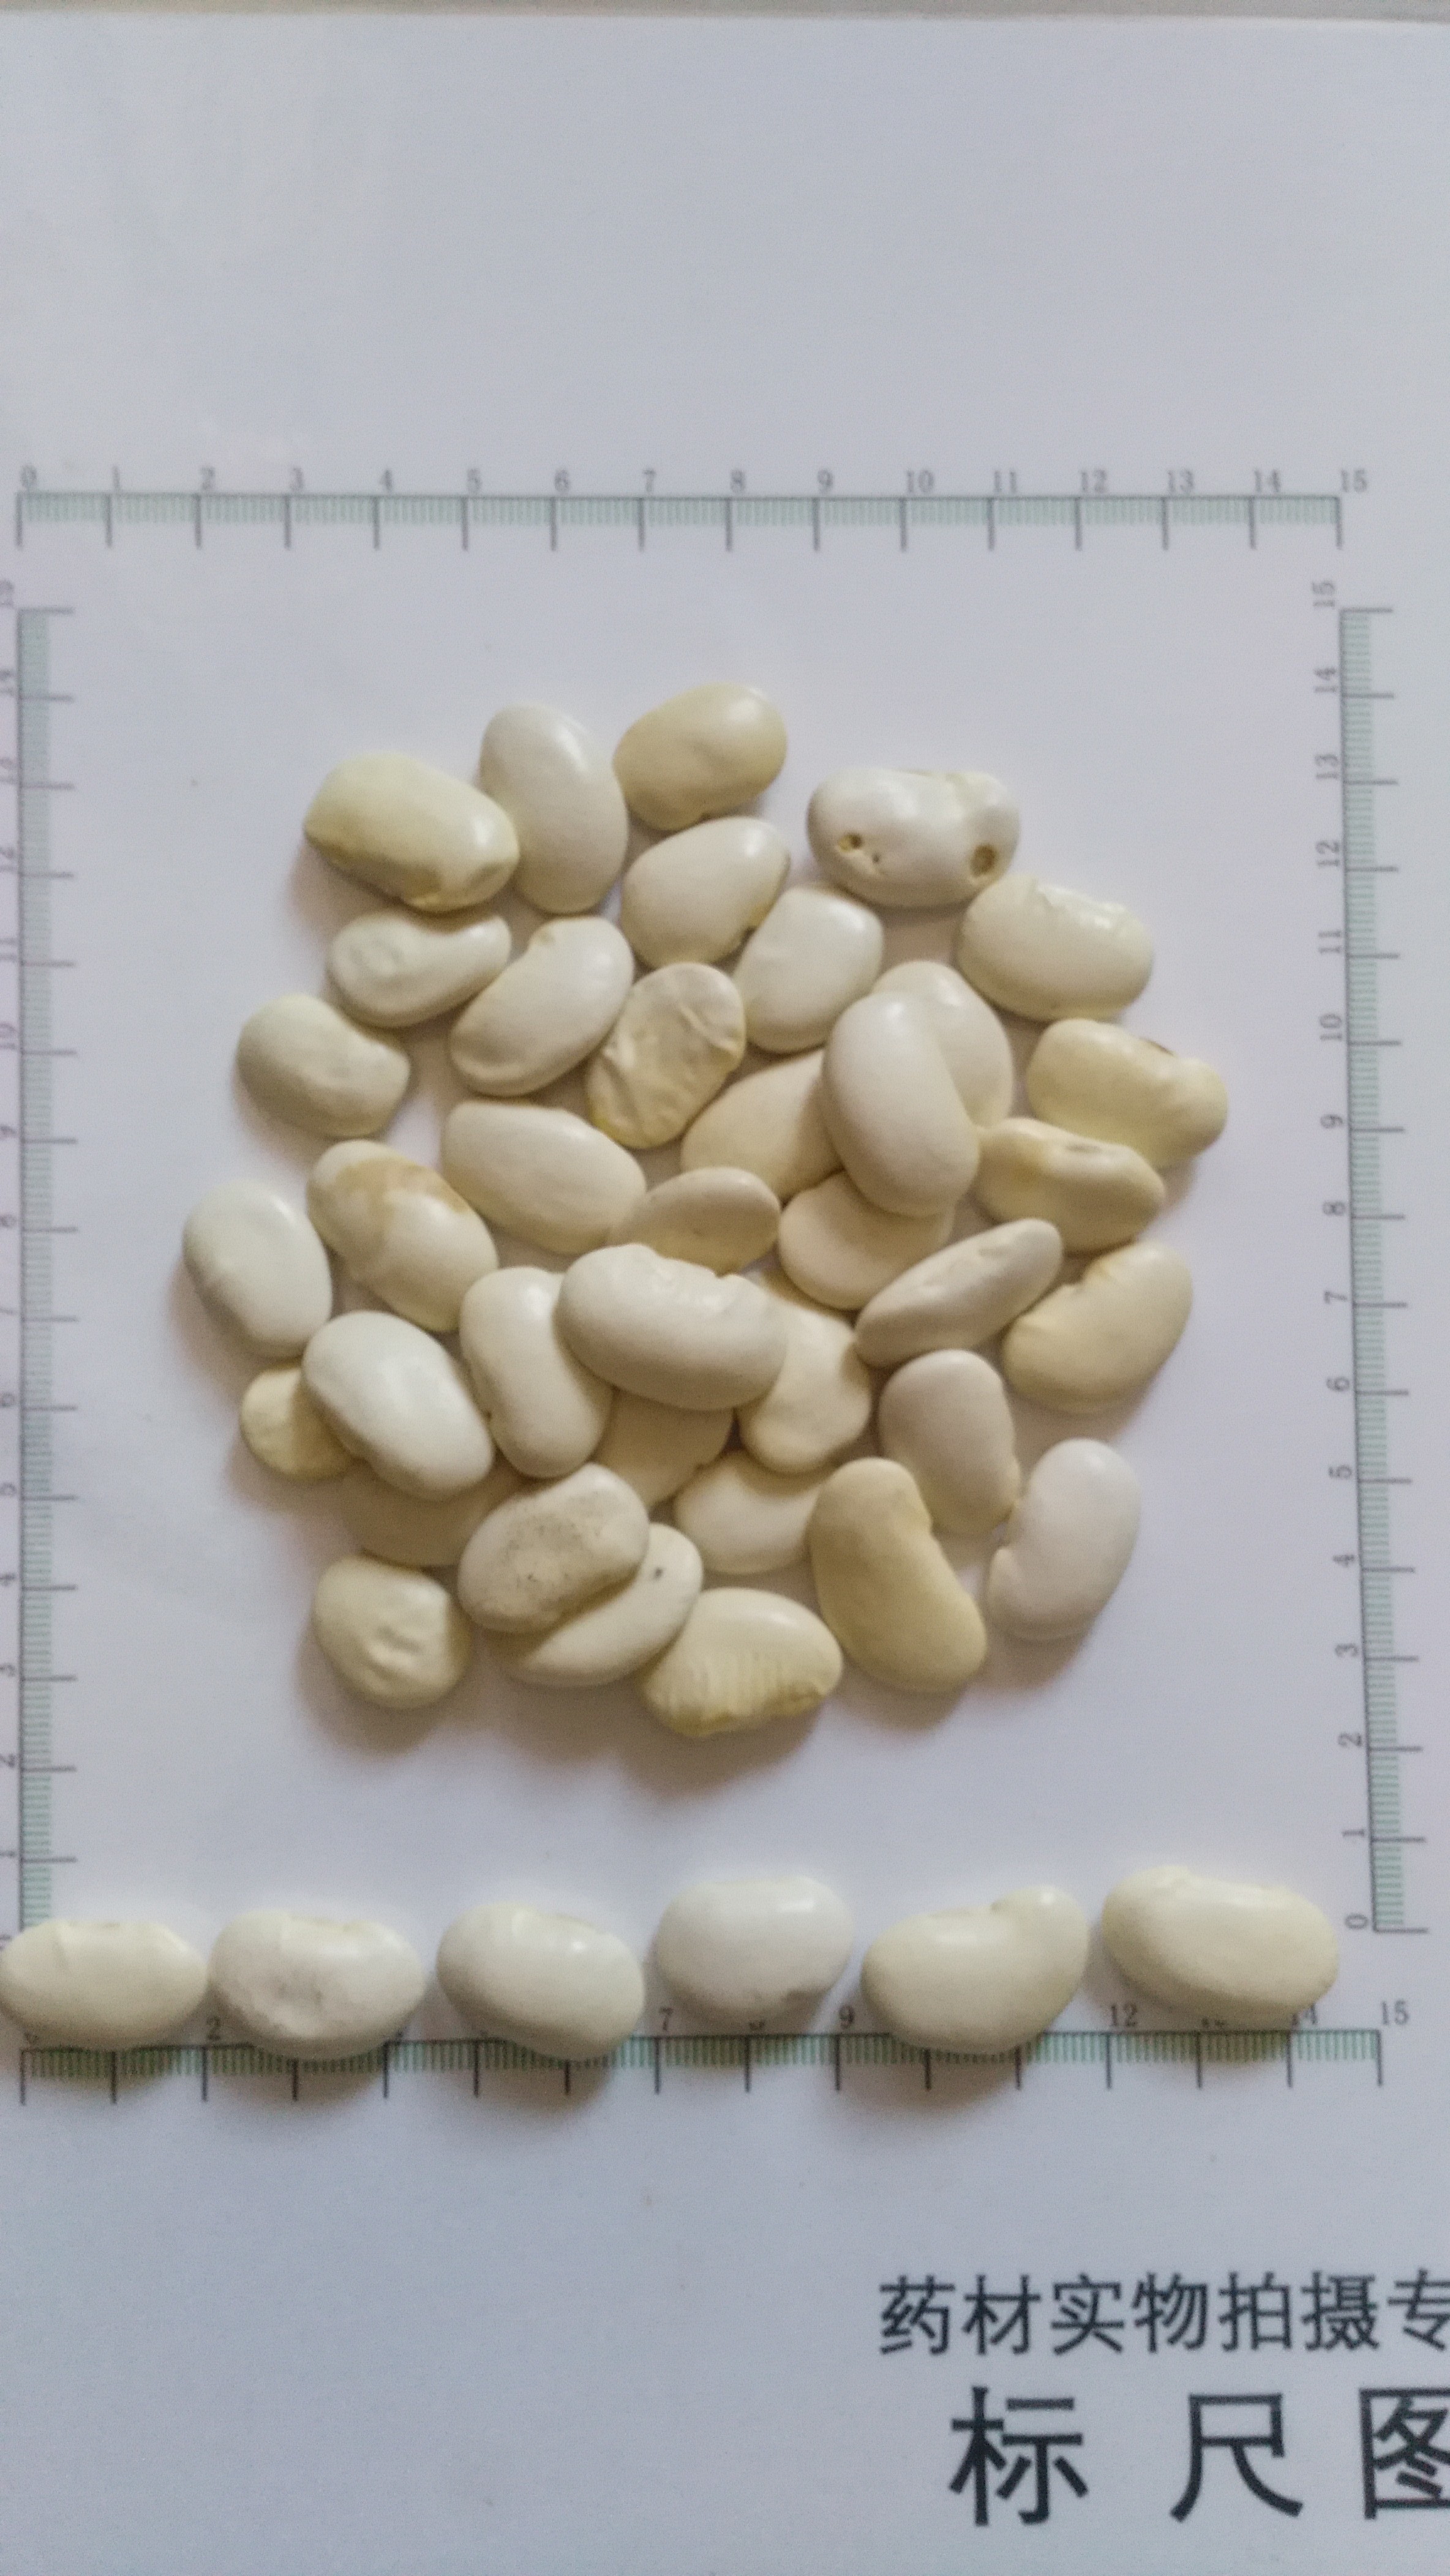 White kidney beans extract ,Phaseolin 1%, 2% for sale